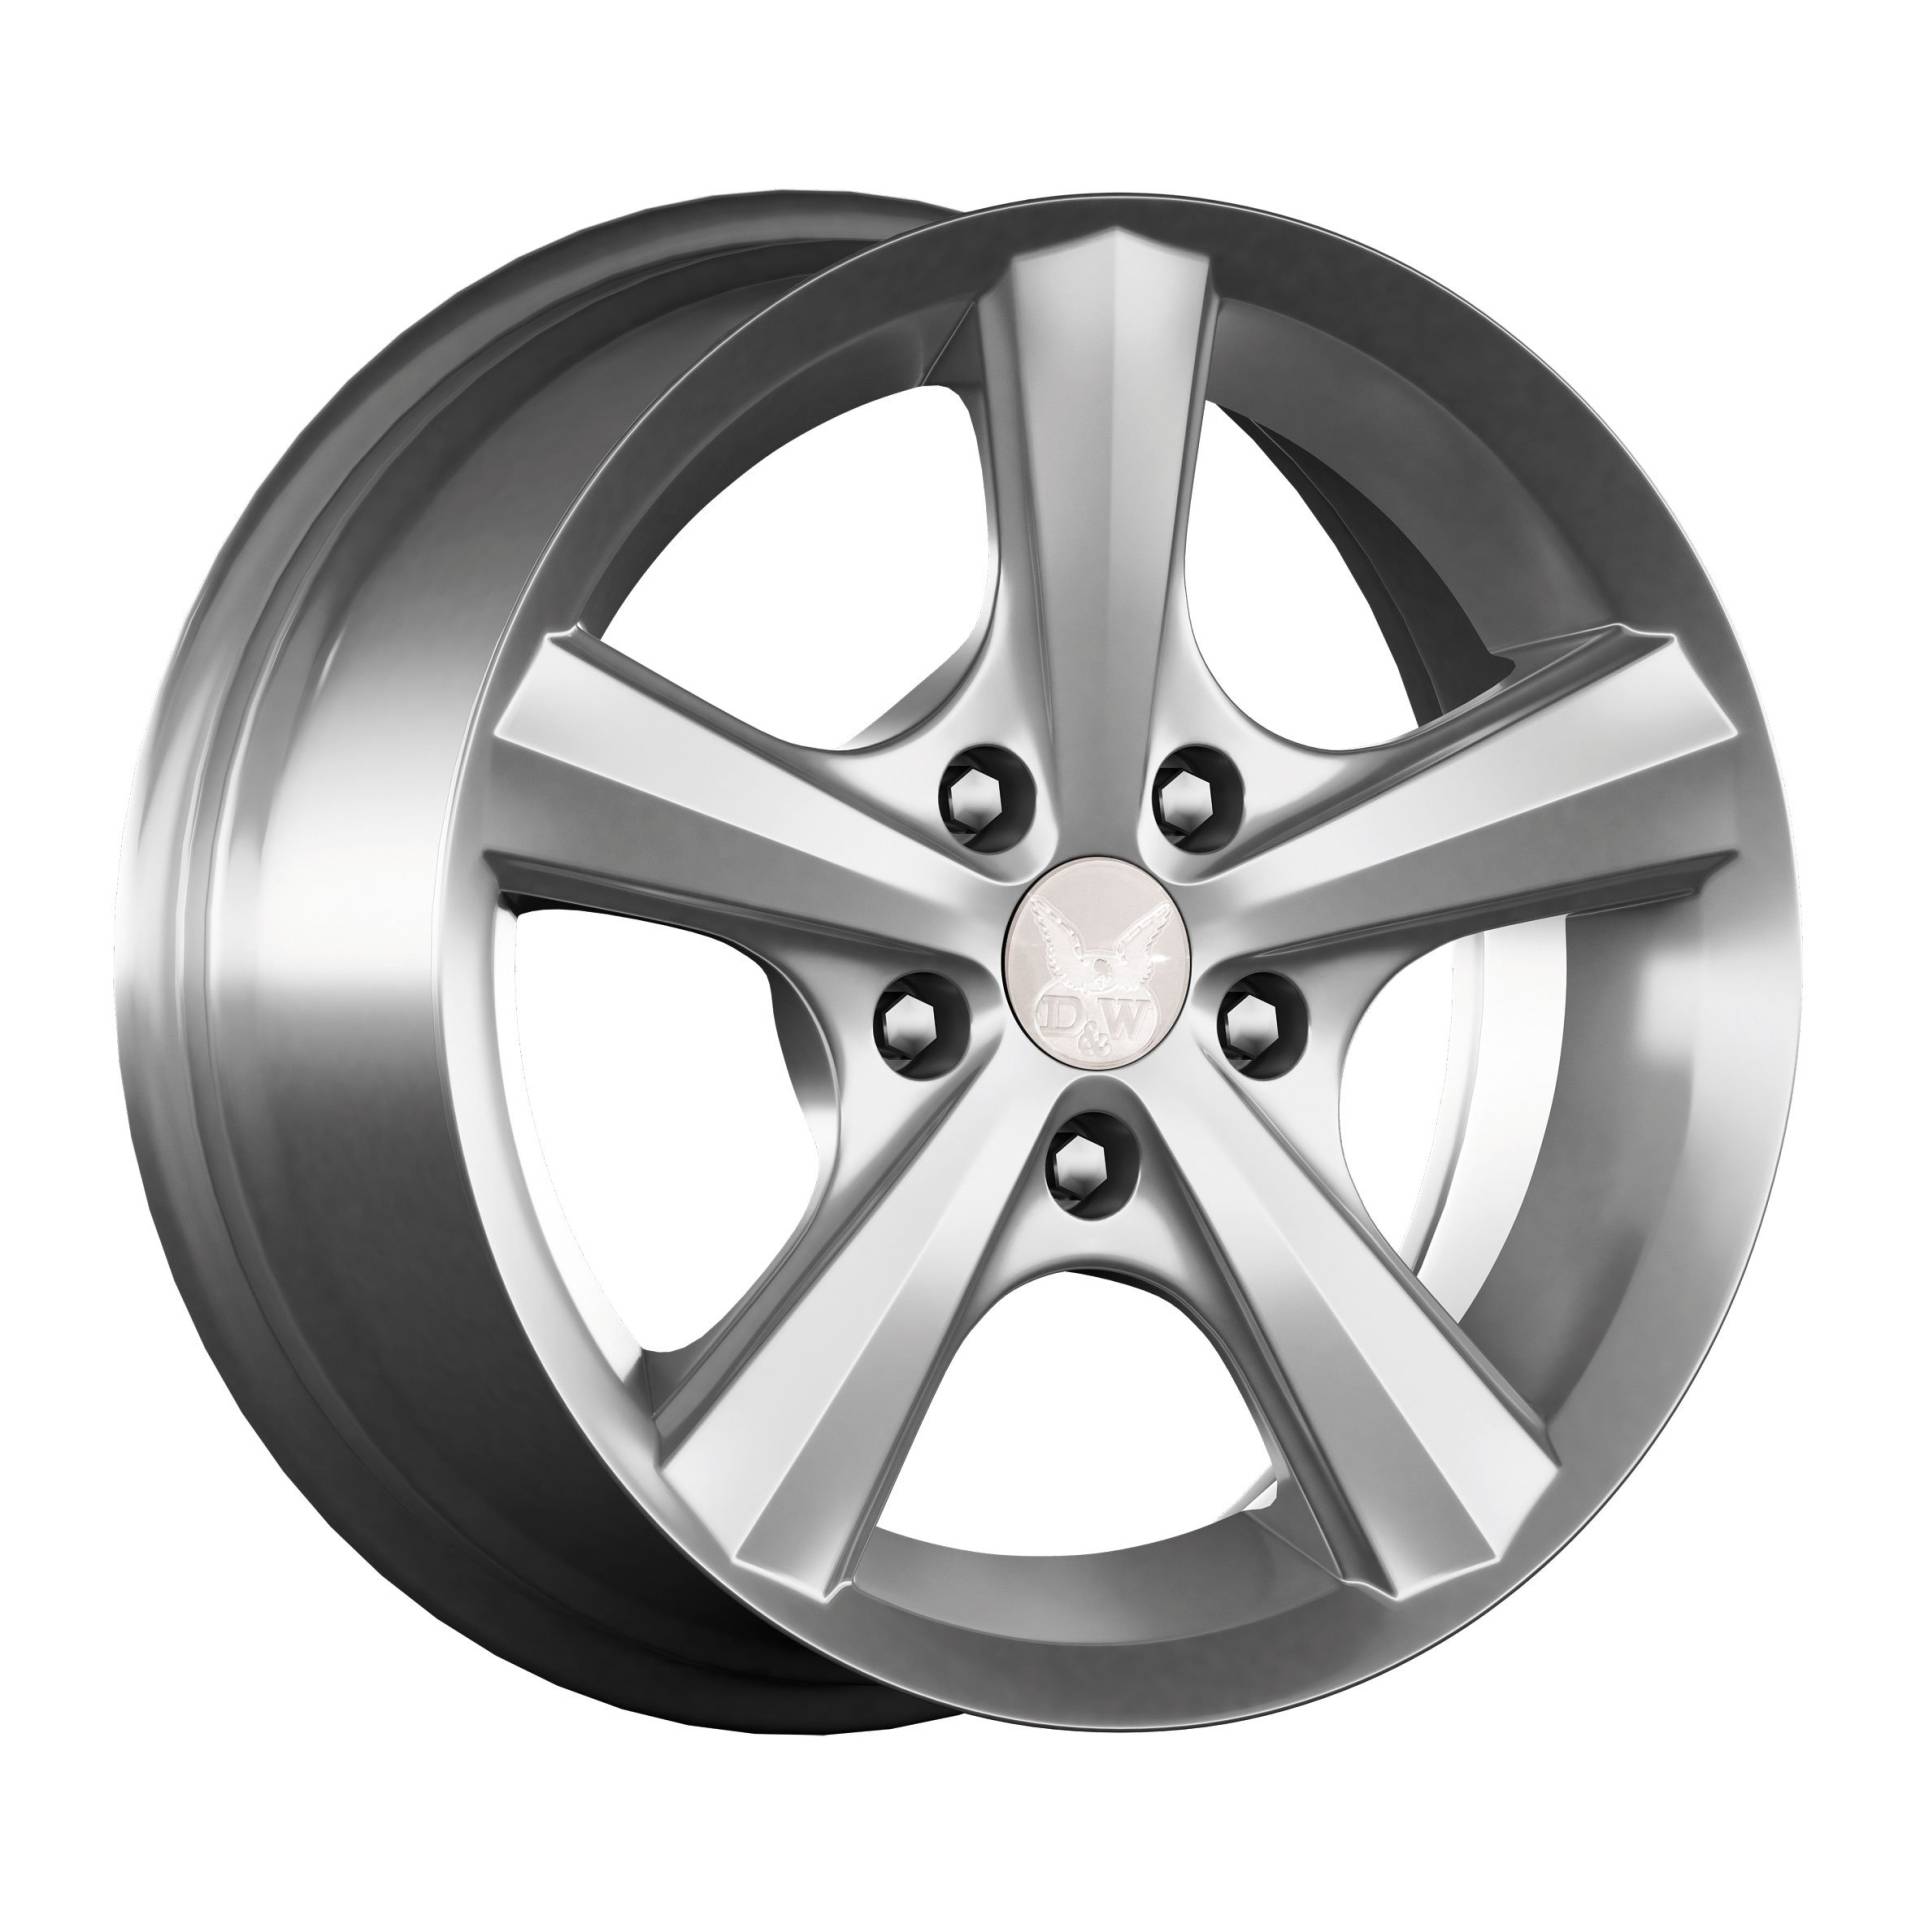 in.pro. FS-616S-5108A45634-Serie-7 D&W Felge Monza silber 7x16 5/108 ET45Ford C-Max / Grand C-Max (DXA), 63-134 kW, Bj. 2010- von in.pro.